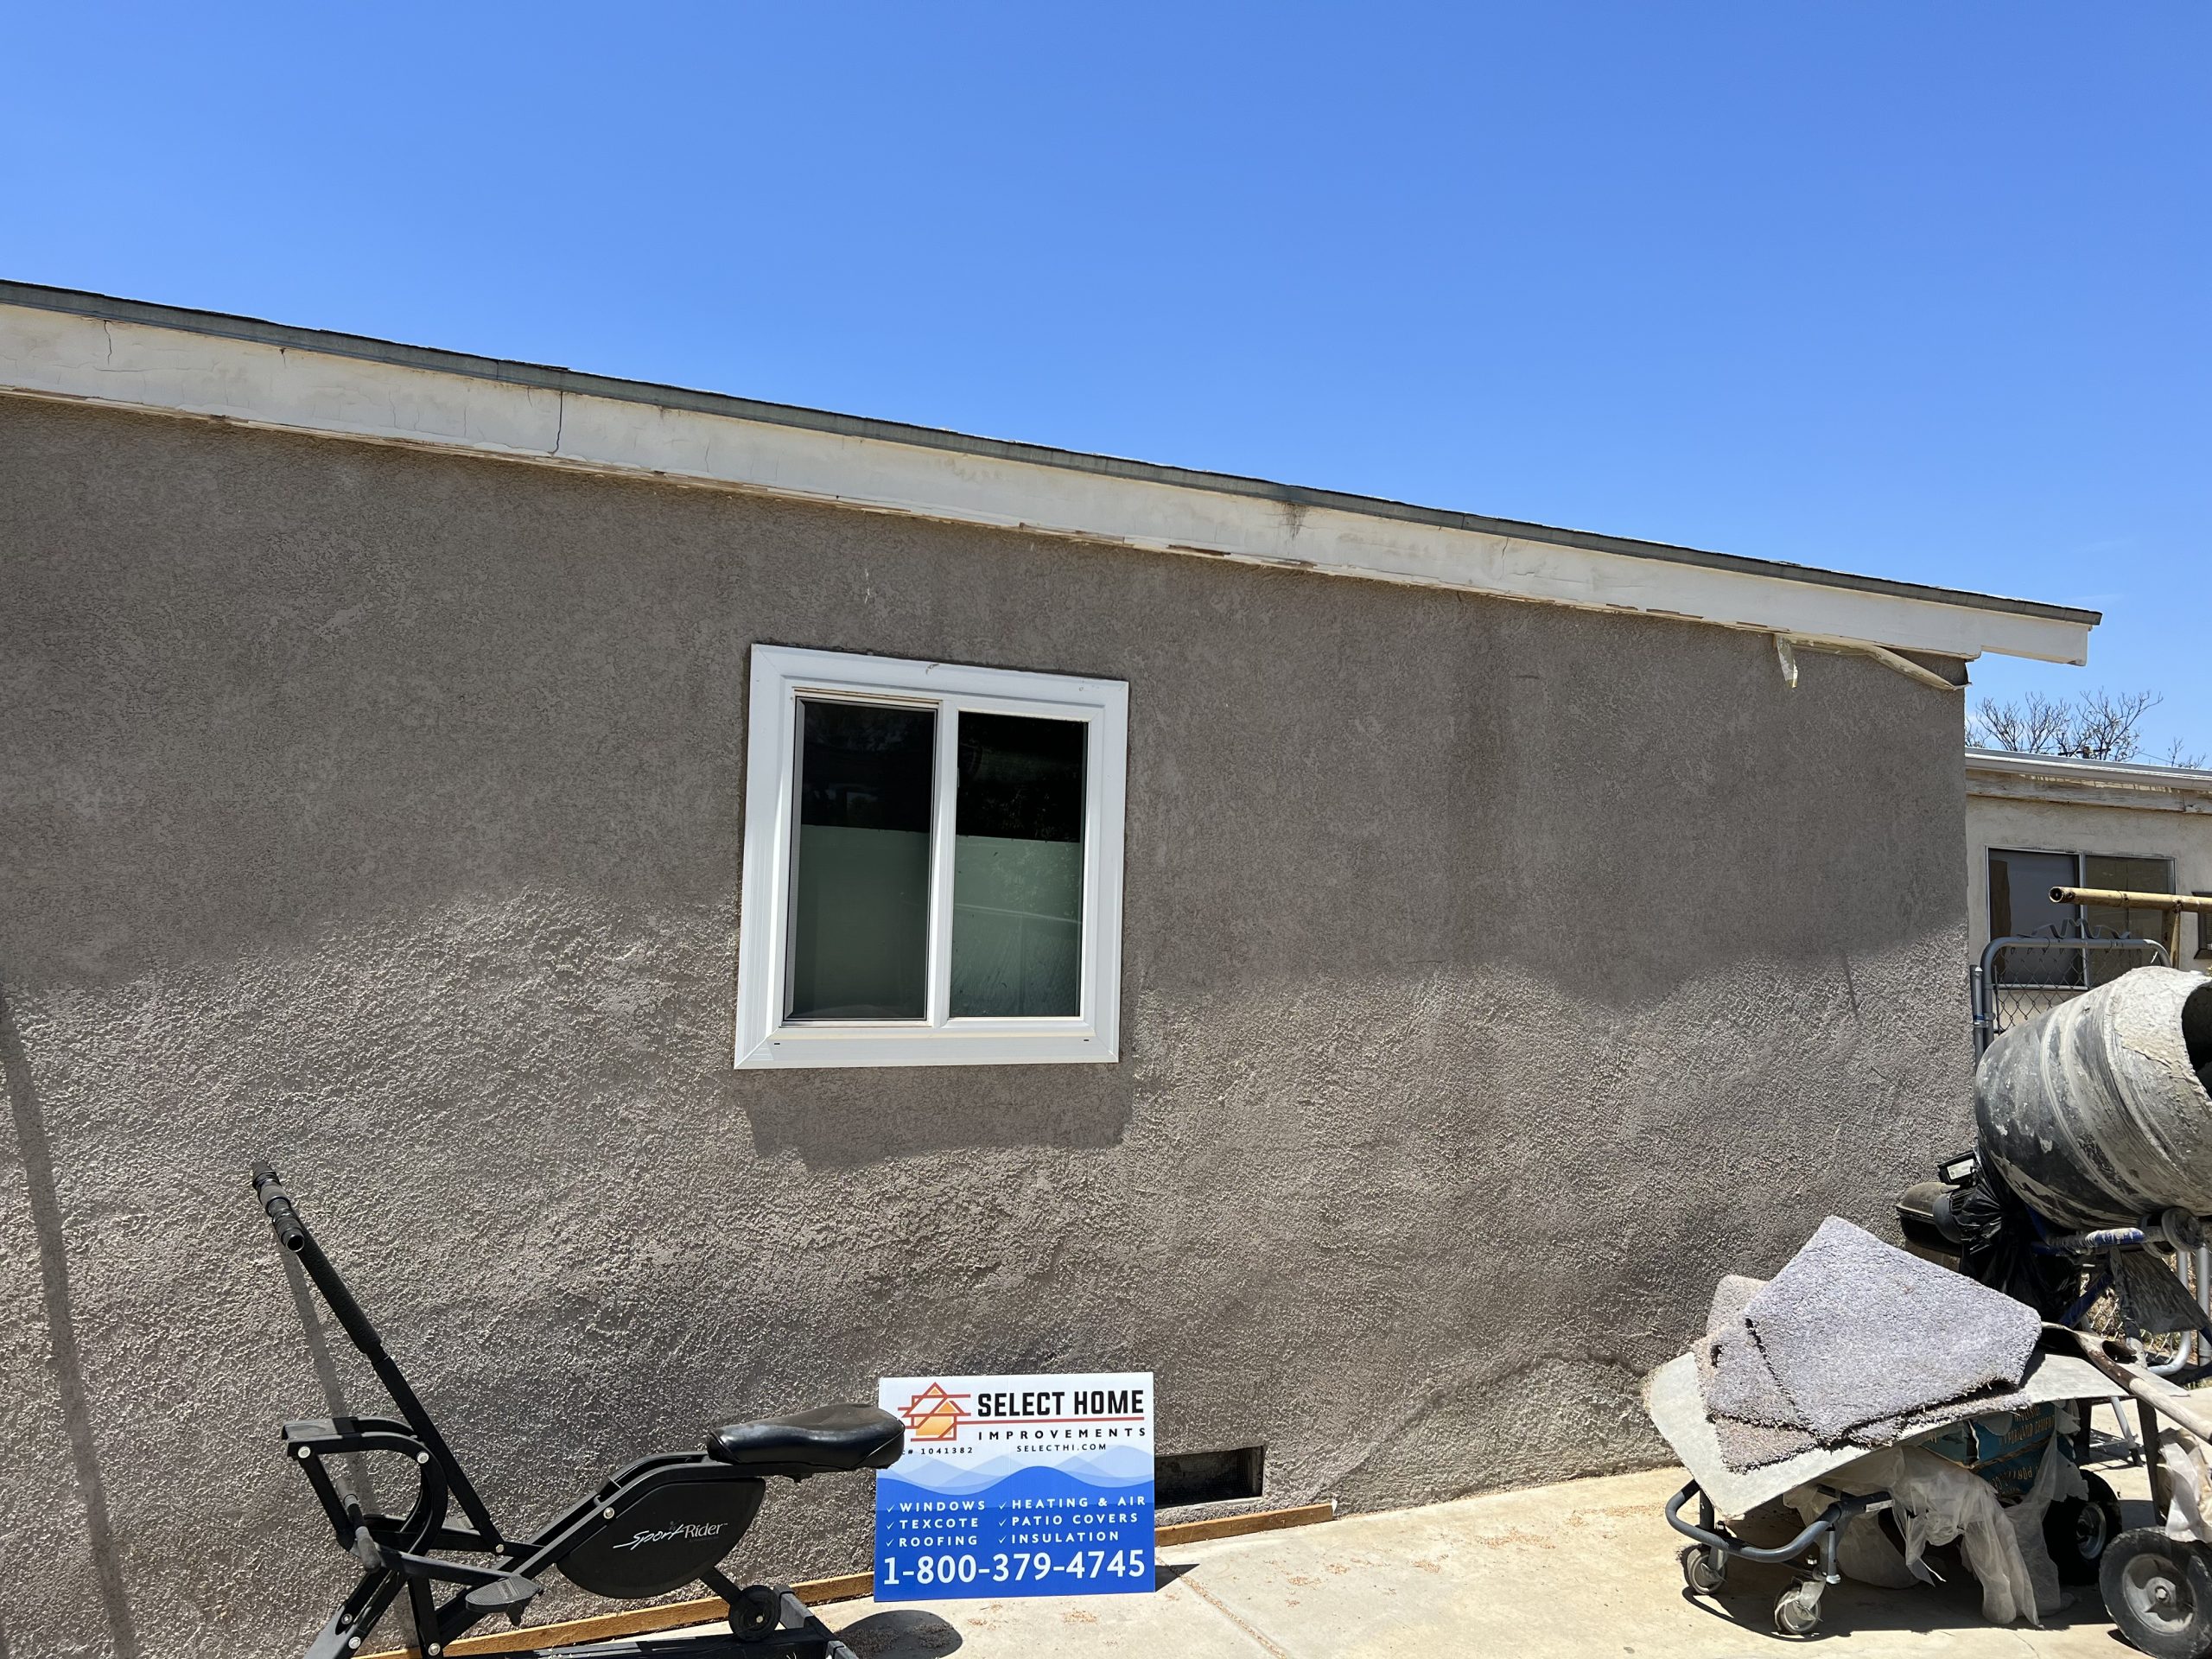 Window Replacement Project in Riverside, CA